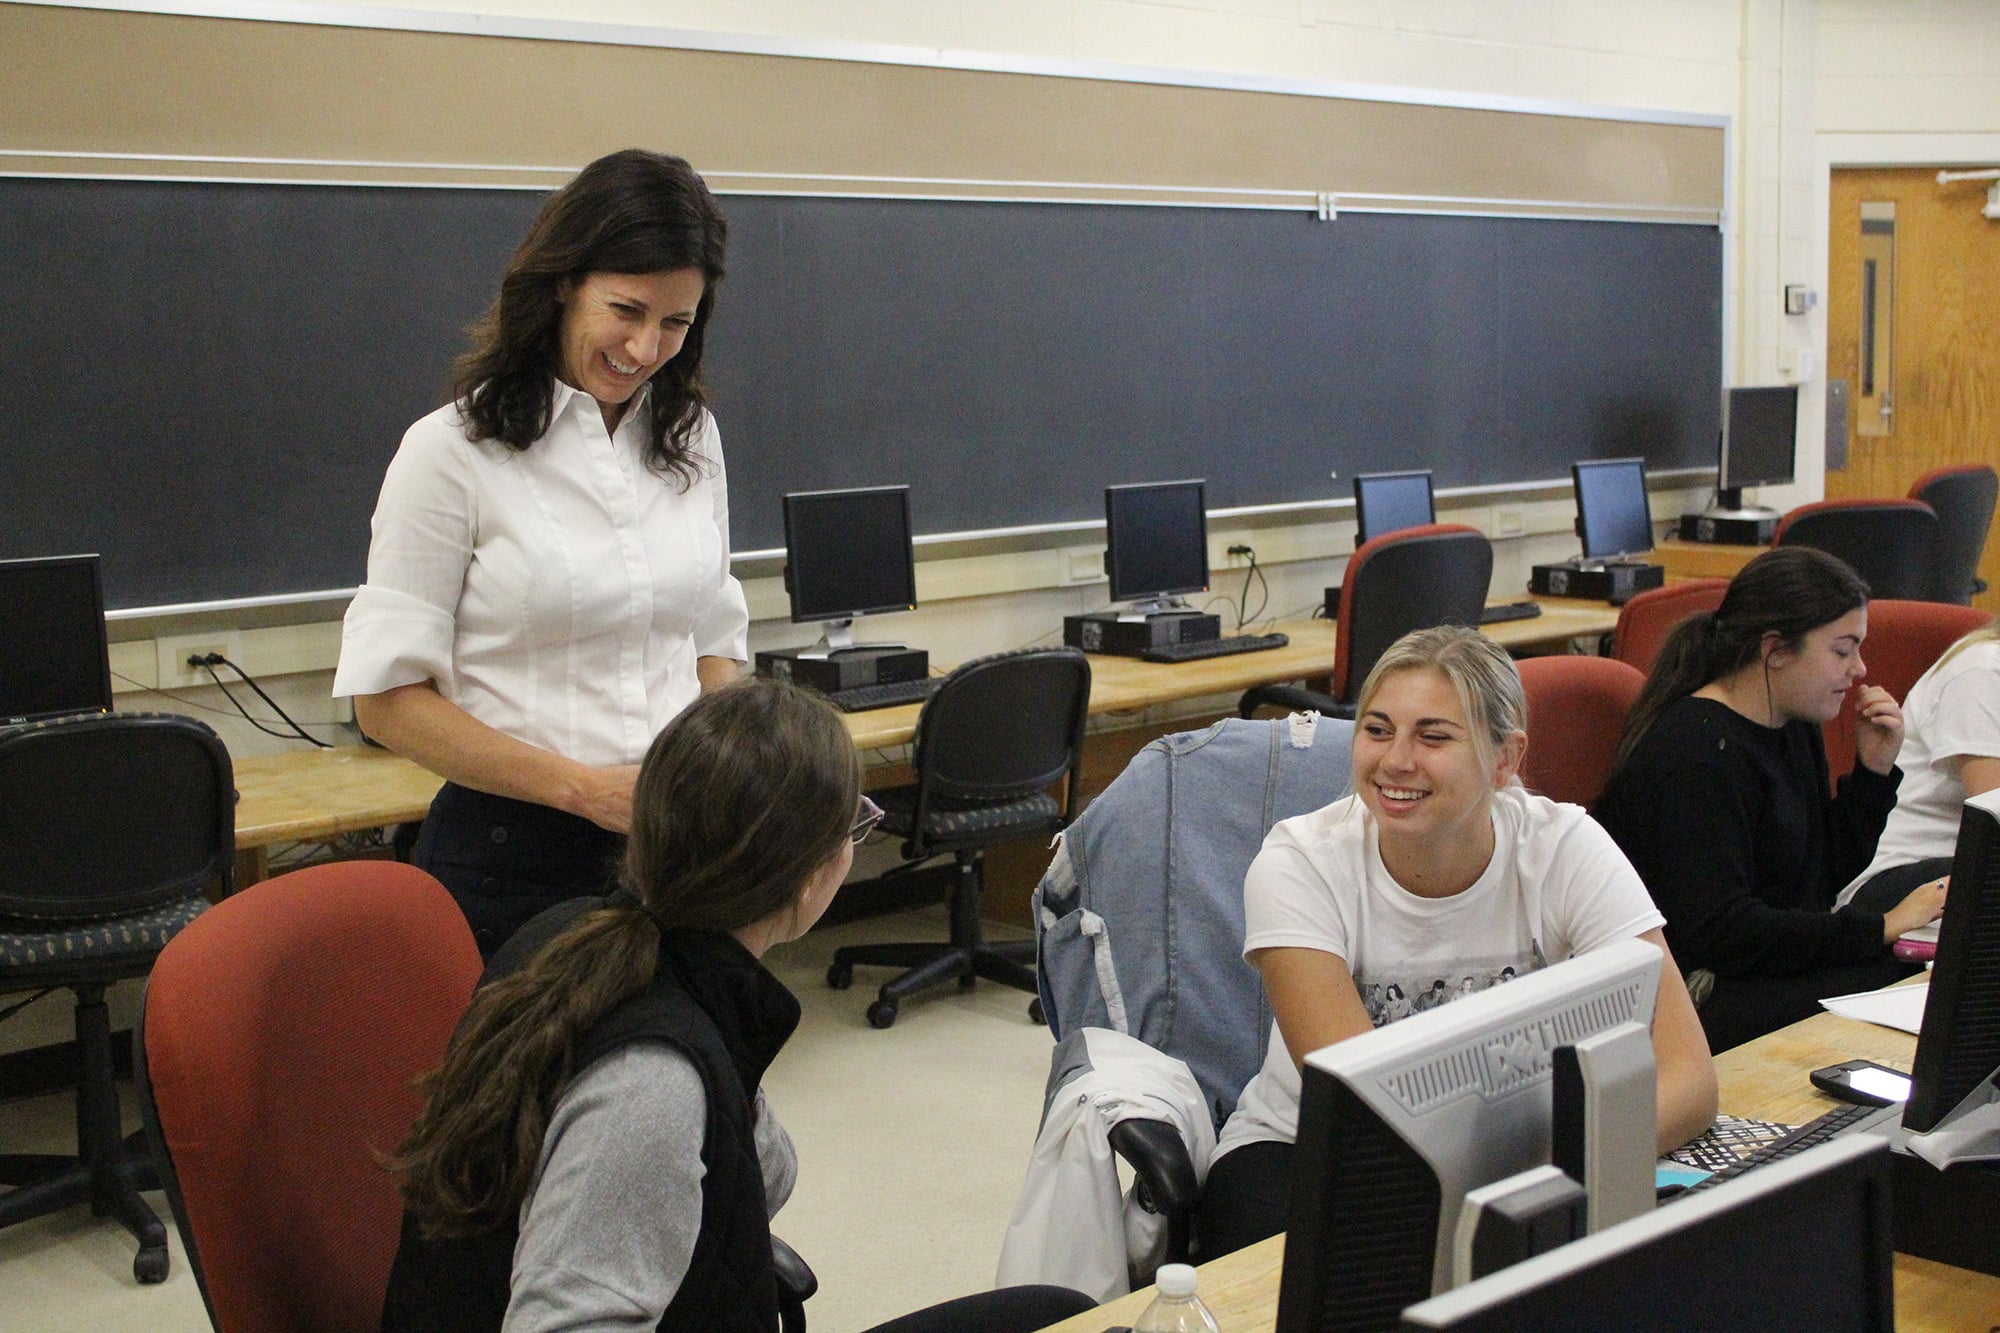 Tara Wyckoff smiles broadly while talking to two students sitting behind a computer monitor during a discussion. Wyckoff has long brown hair and is wearing a white dress shirt.